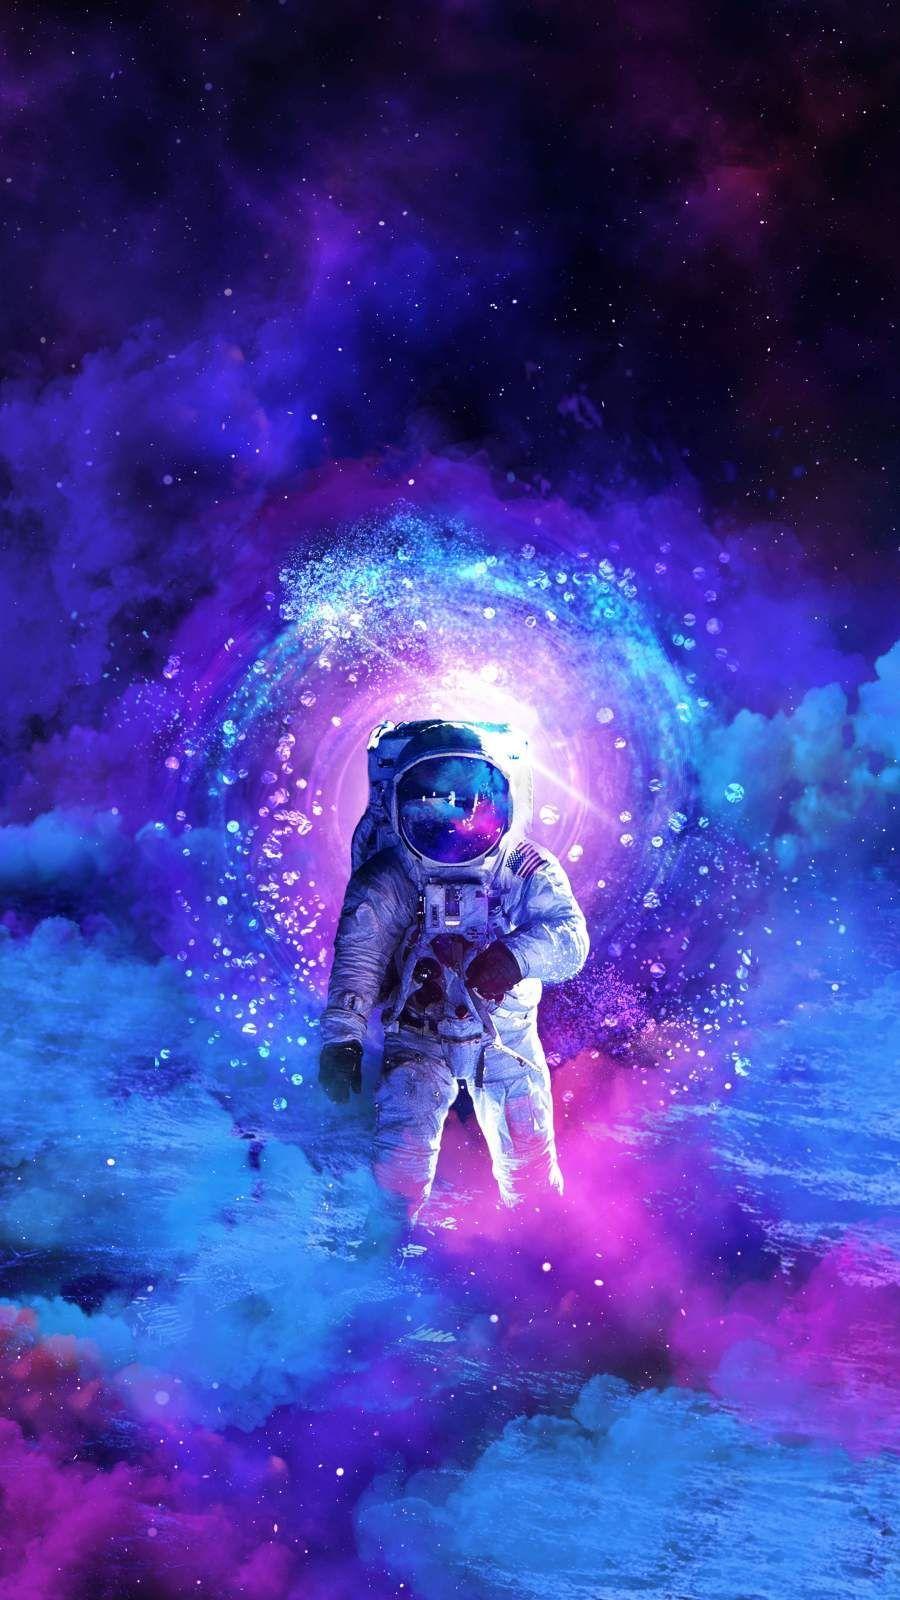 Cool Space Astronaut Wallpapers Top Free Cool Space Astronaut Backgrounds Wallpaperaccess 1940